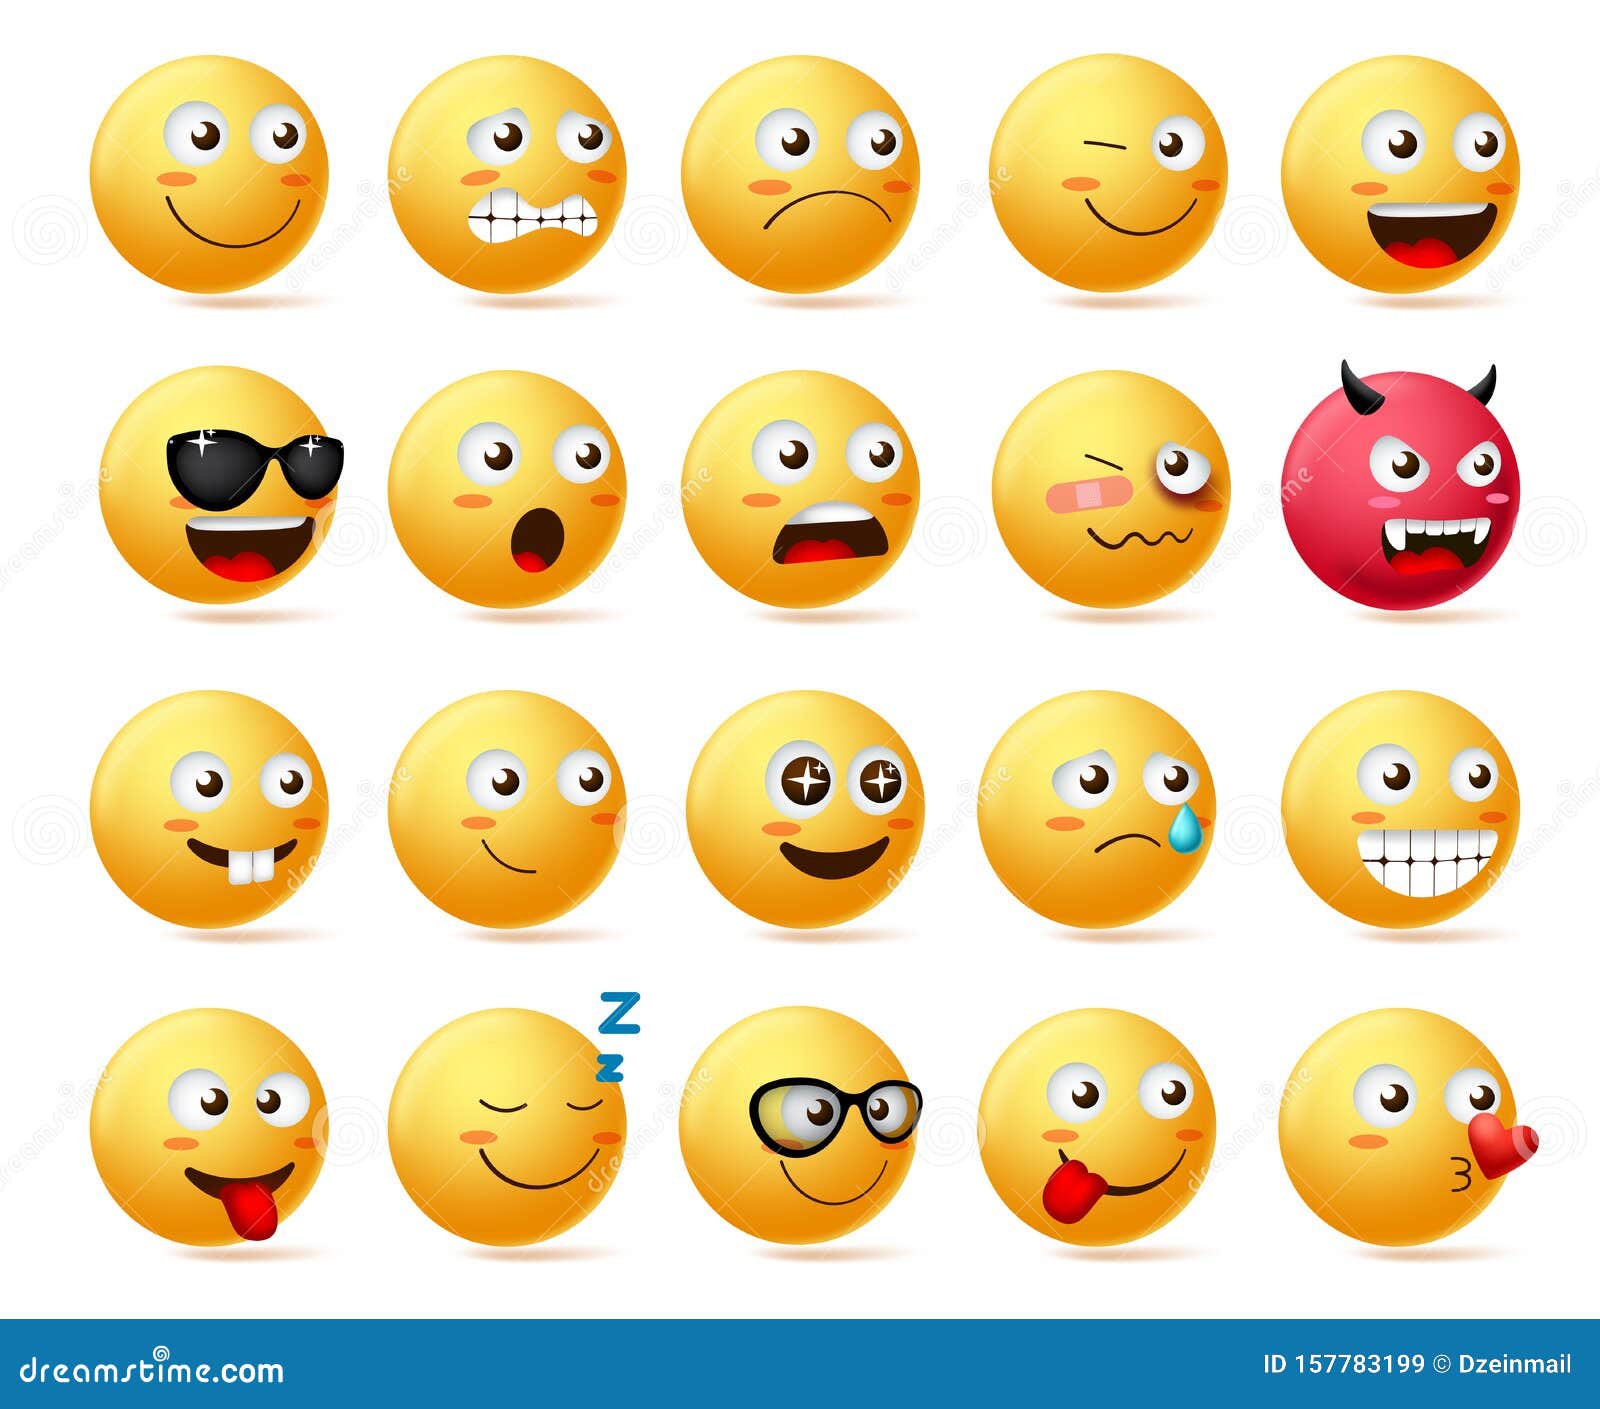 smiley emoji side view set . smileys emoticon or icon face character.